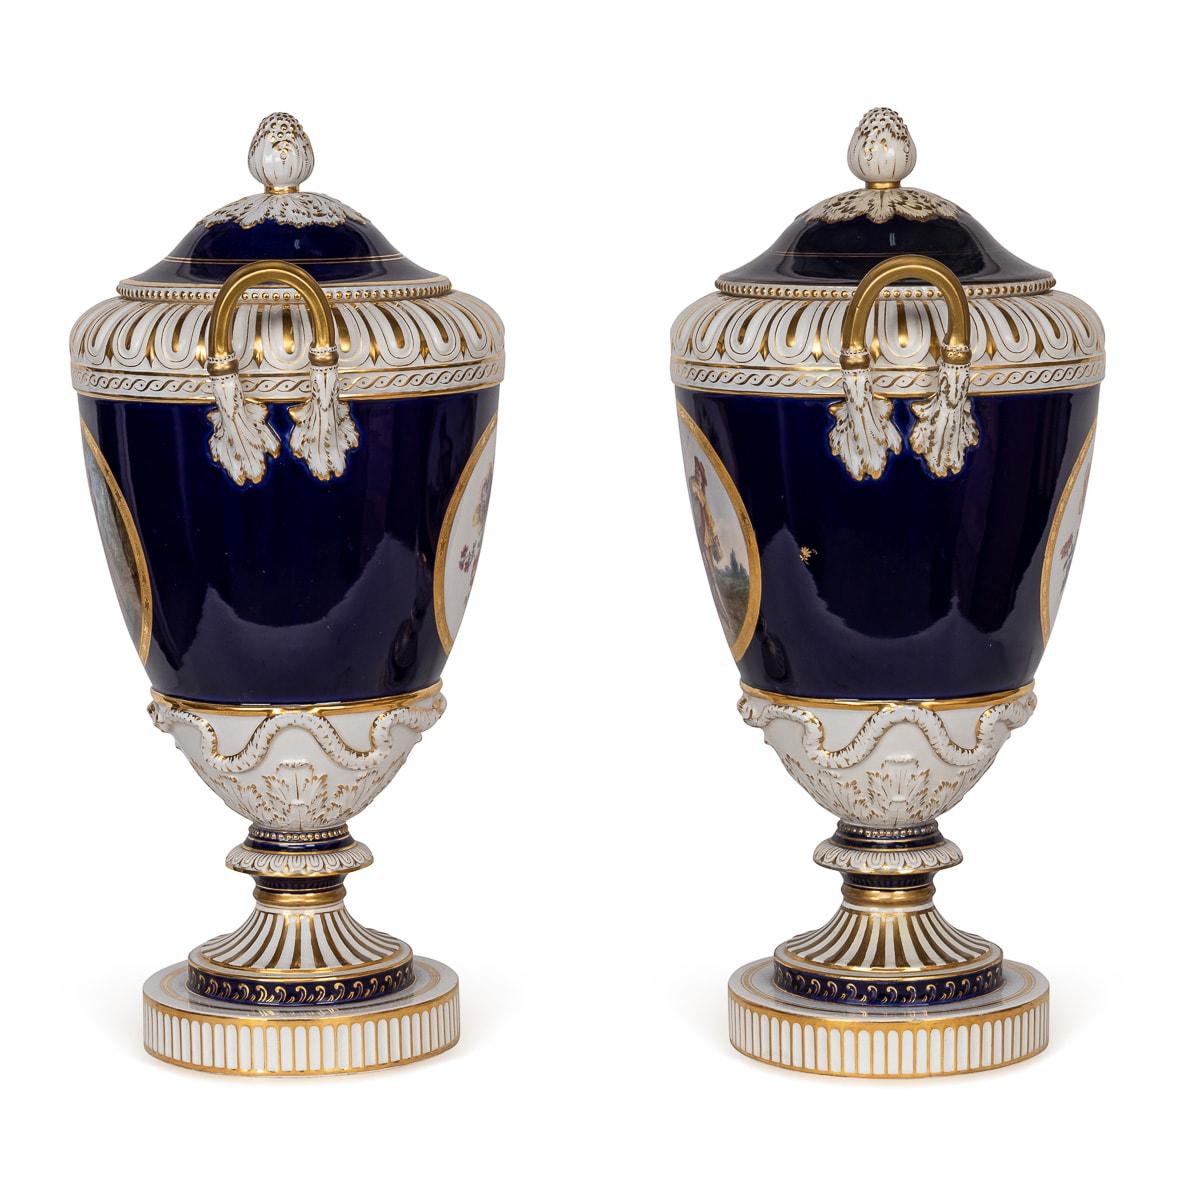 Other Antique 19Th Century German KPM Porcelain Two-Handled Vases And Covers c.1890 For Sale